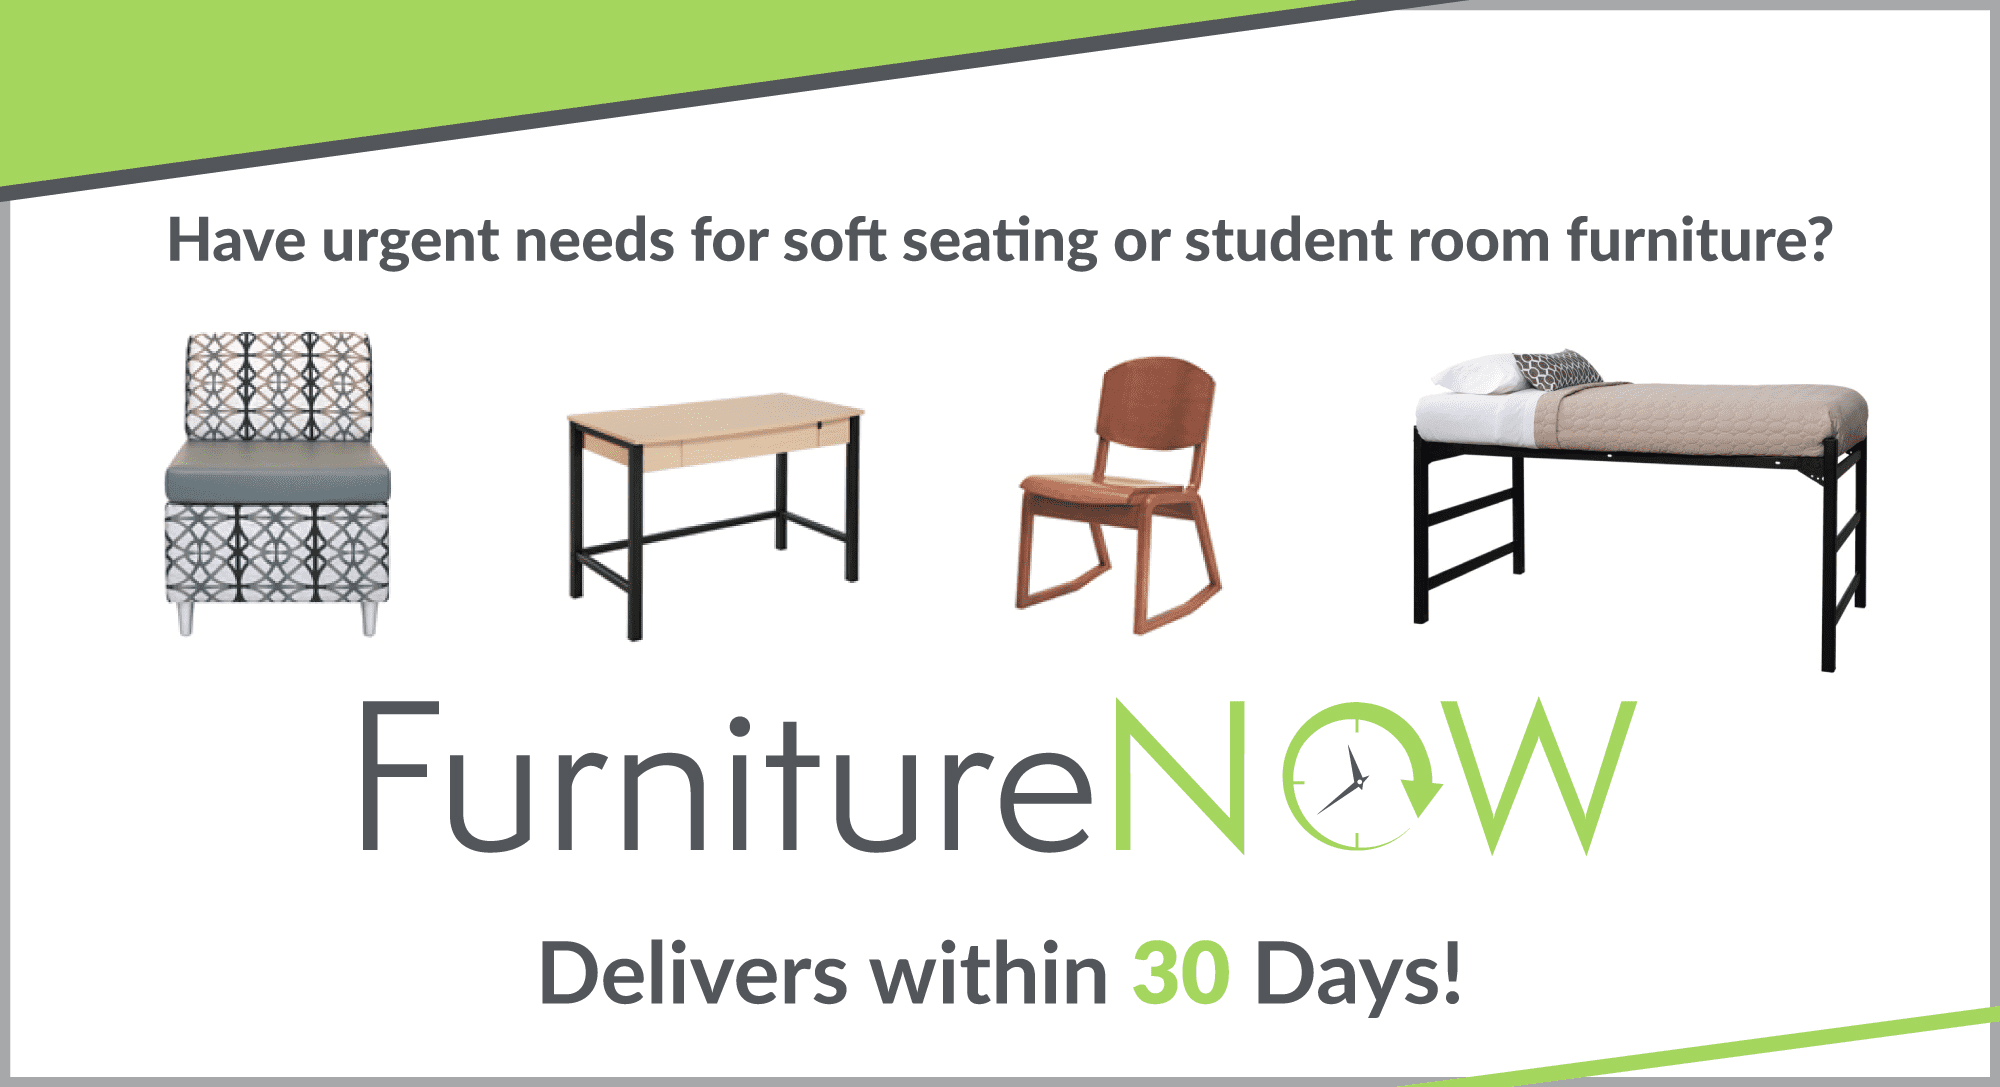 Furniture NOW